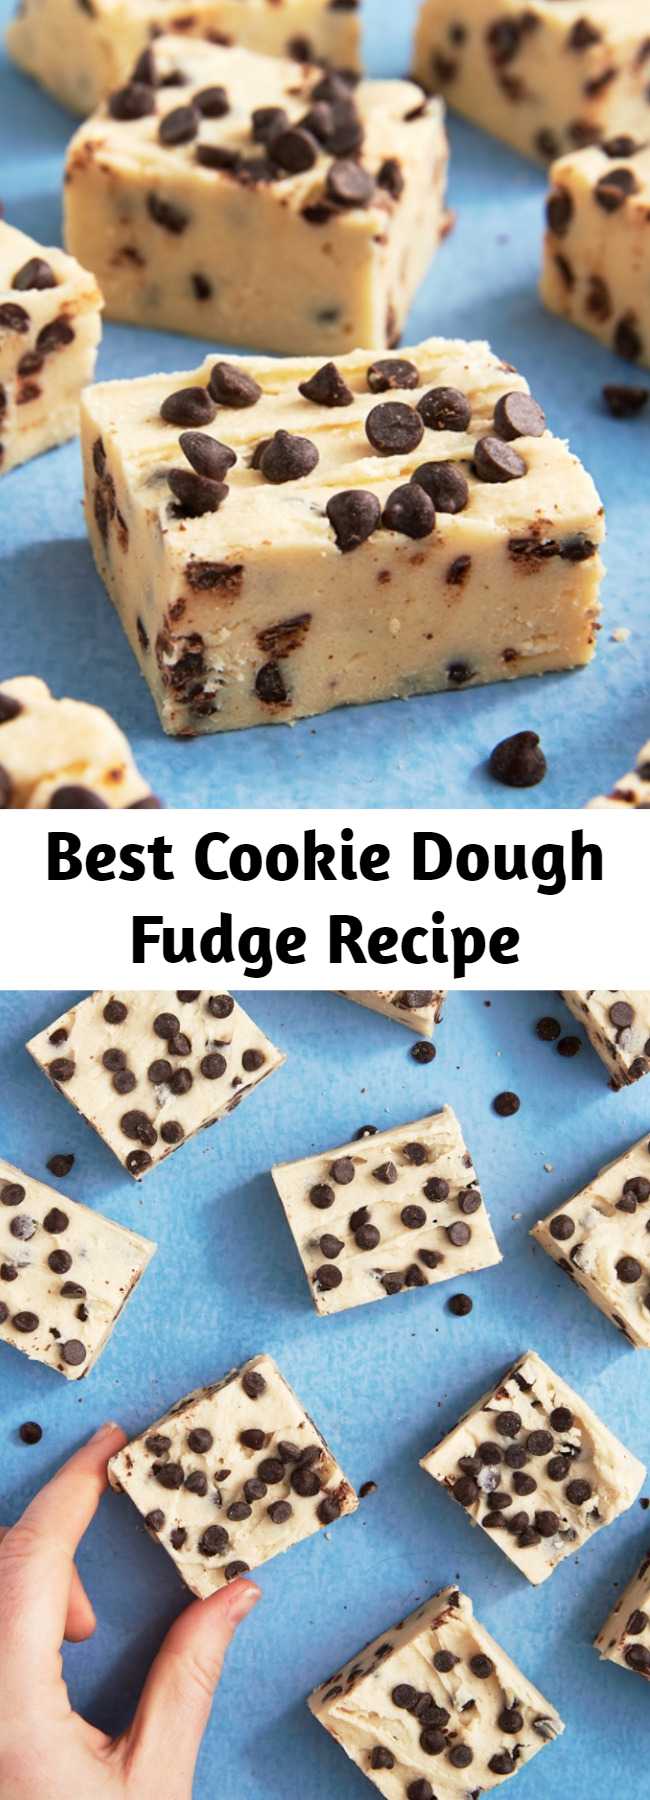 Best Cookie Dough Fudge Recipe - This fudge is for the cookie dough lovers of the world.